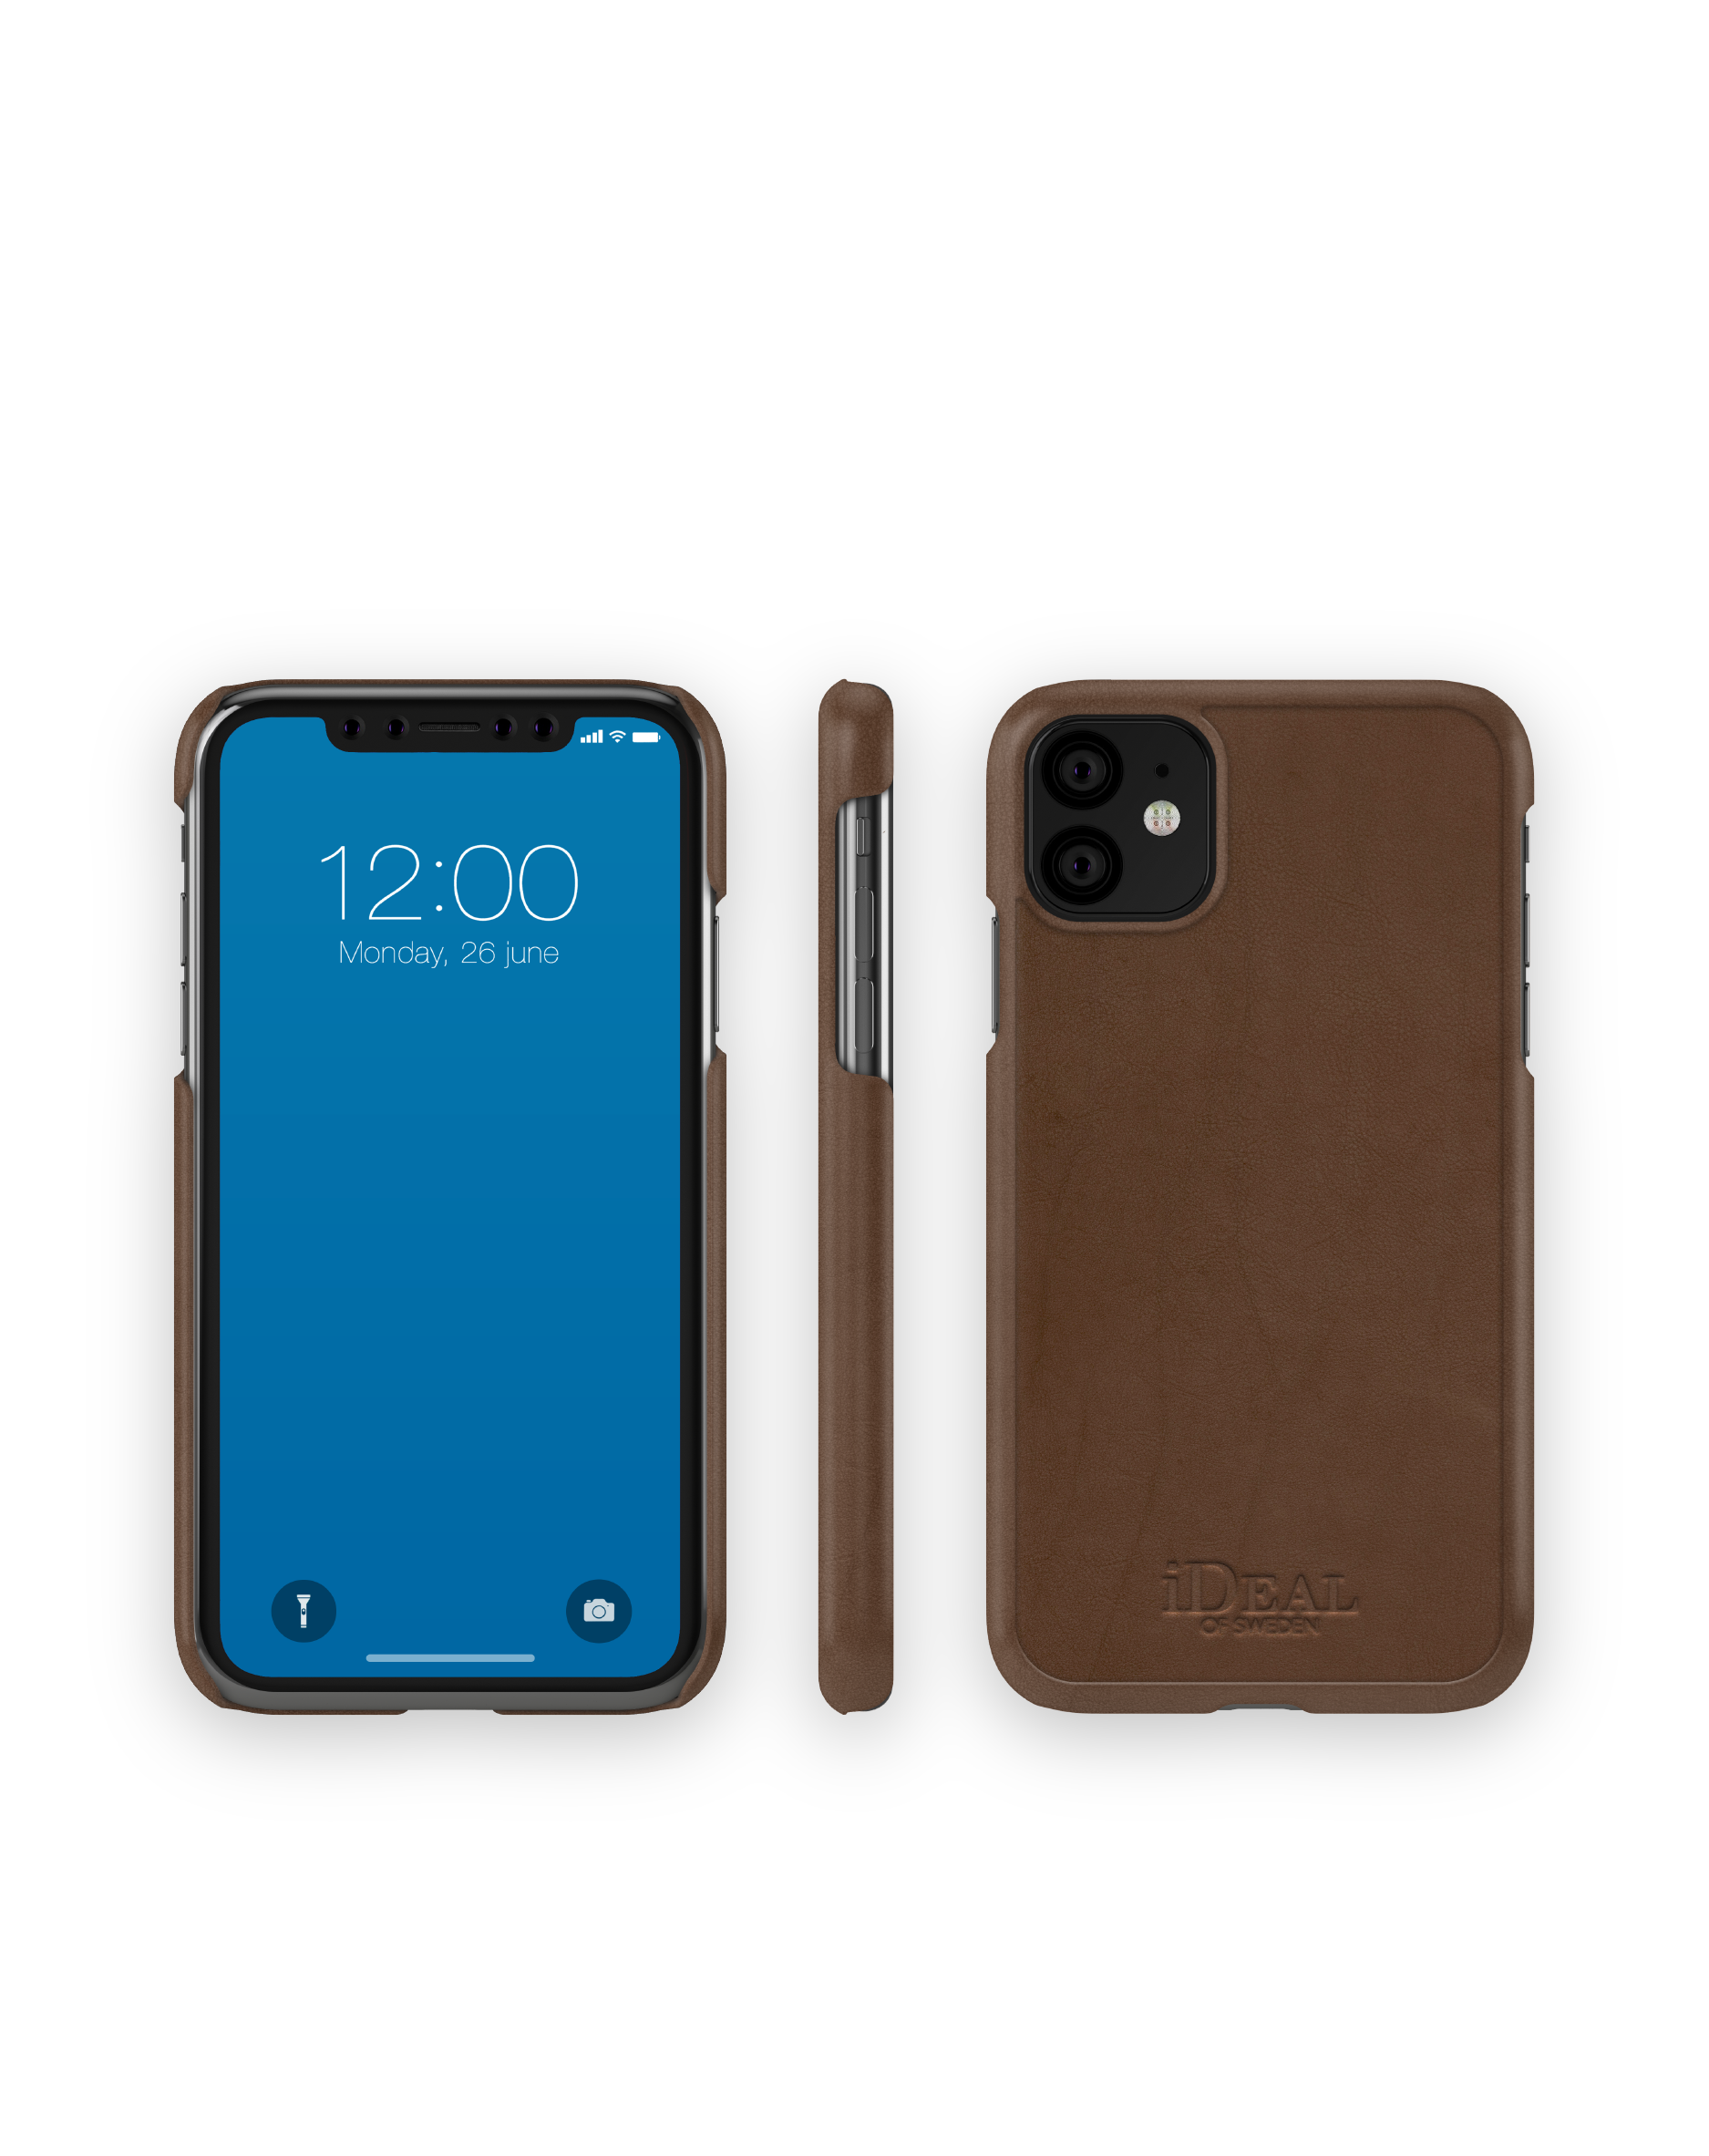 XR, Brown Apple Backcover, OF SWEDEN IDEAL 11, iPhone IDFC-I1961-COM-03, Apple, iPhone Apple